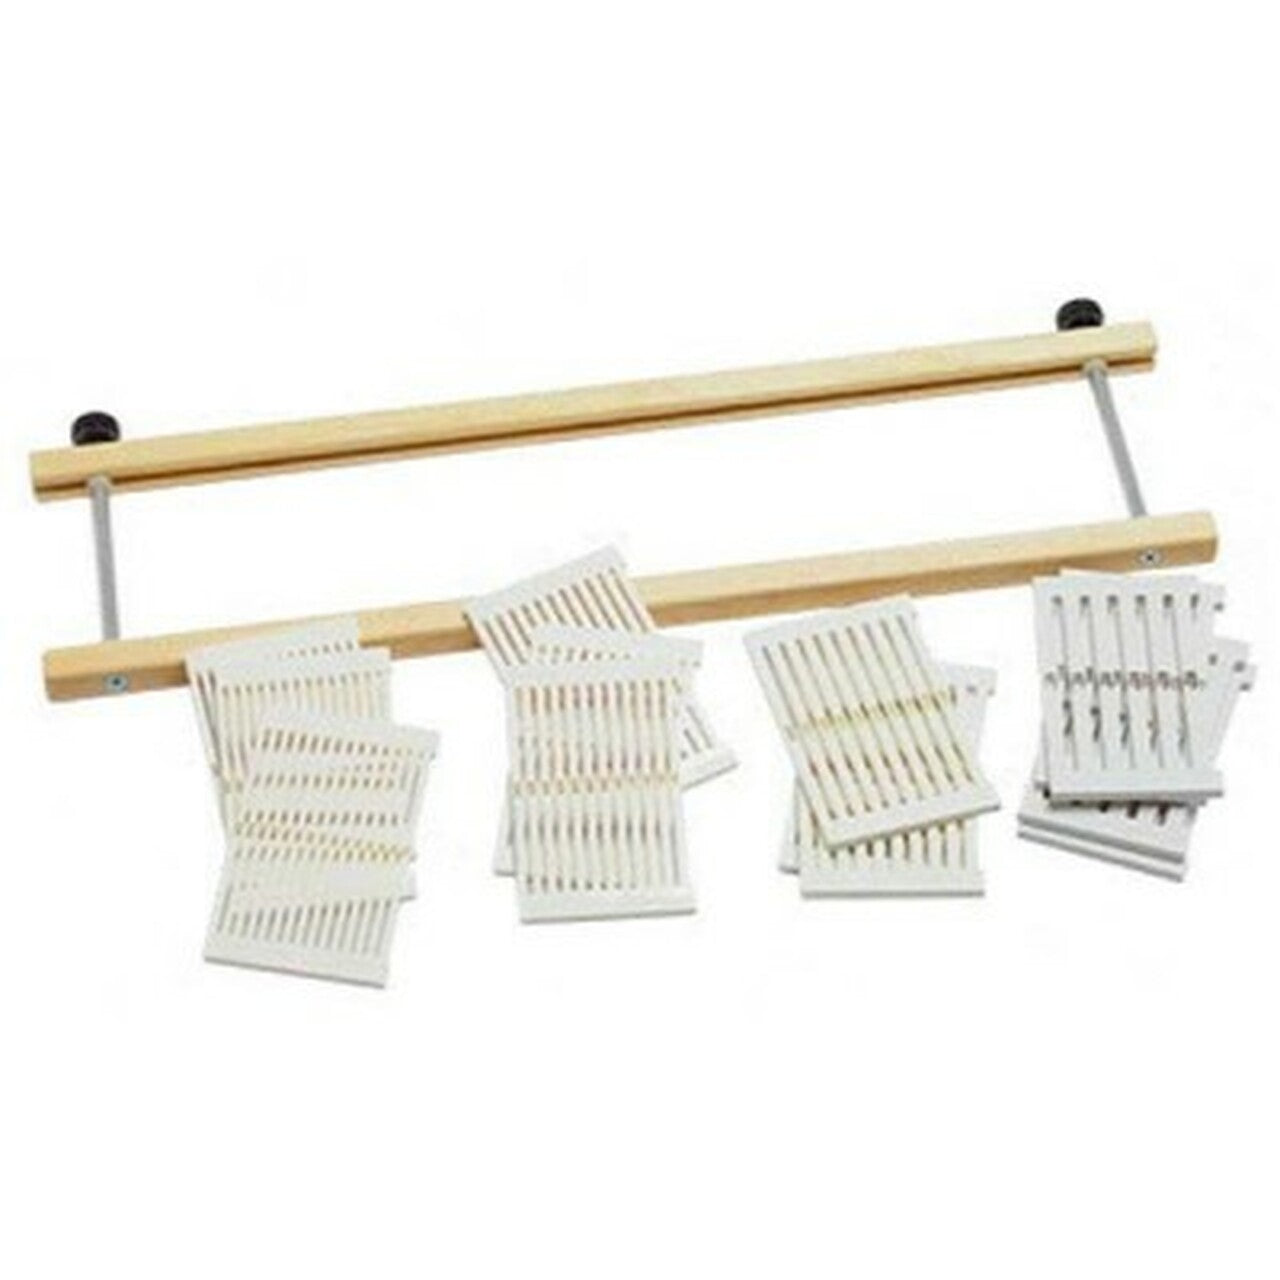 Schact Rigid Heddle Variable Dent Reeds